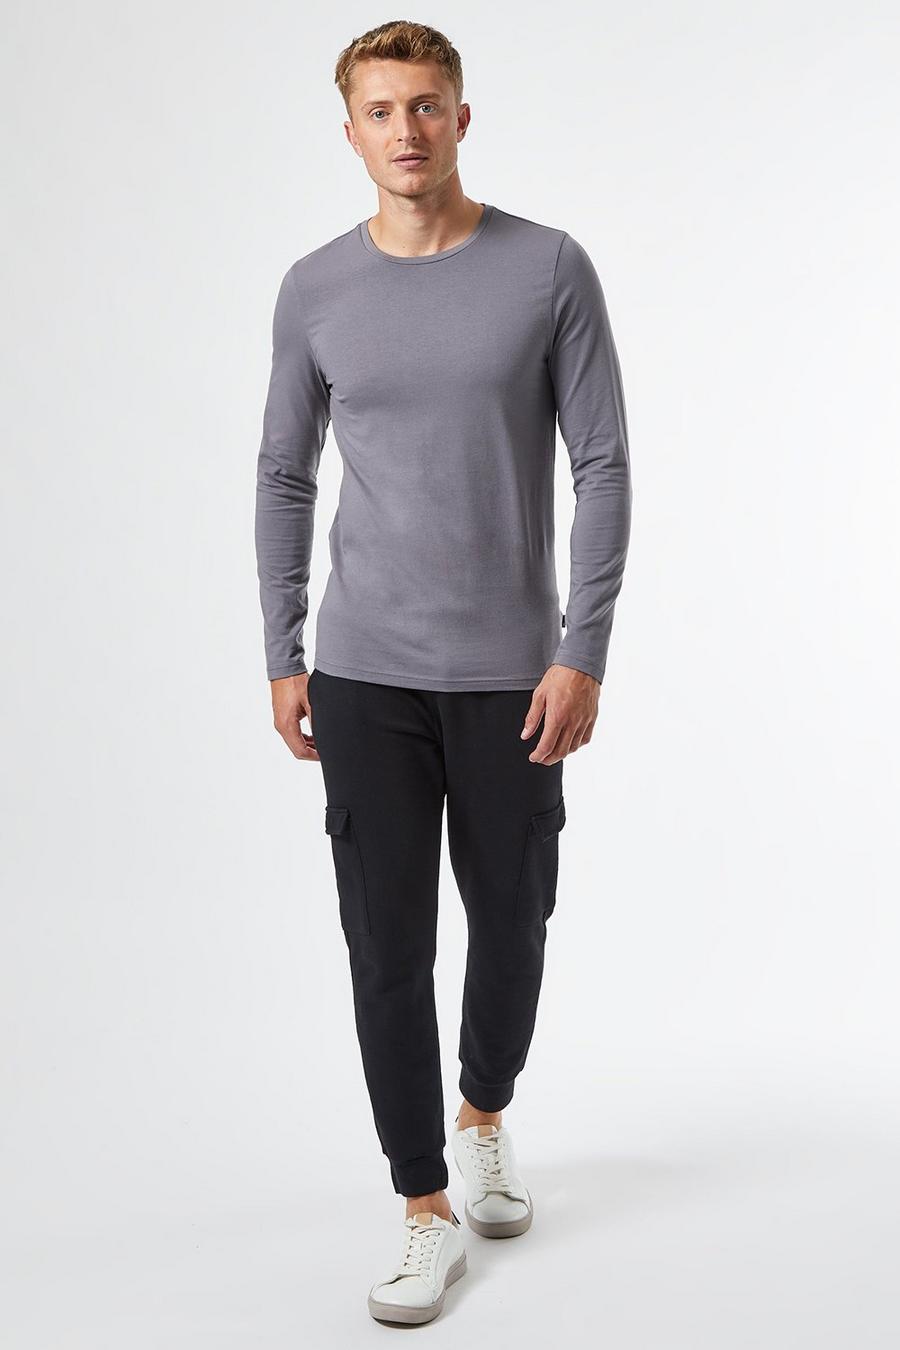 Grey Long Sleeved Muscle Fit TShirt